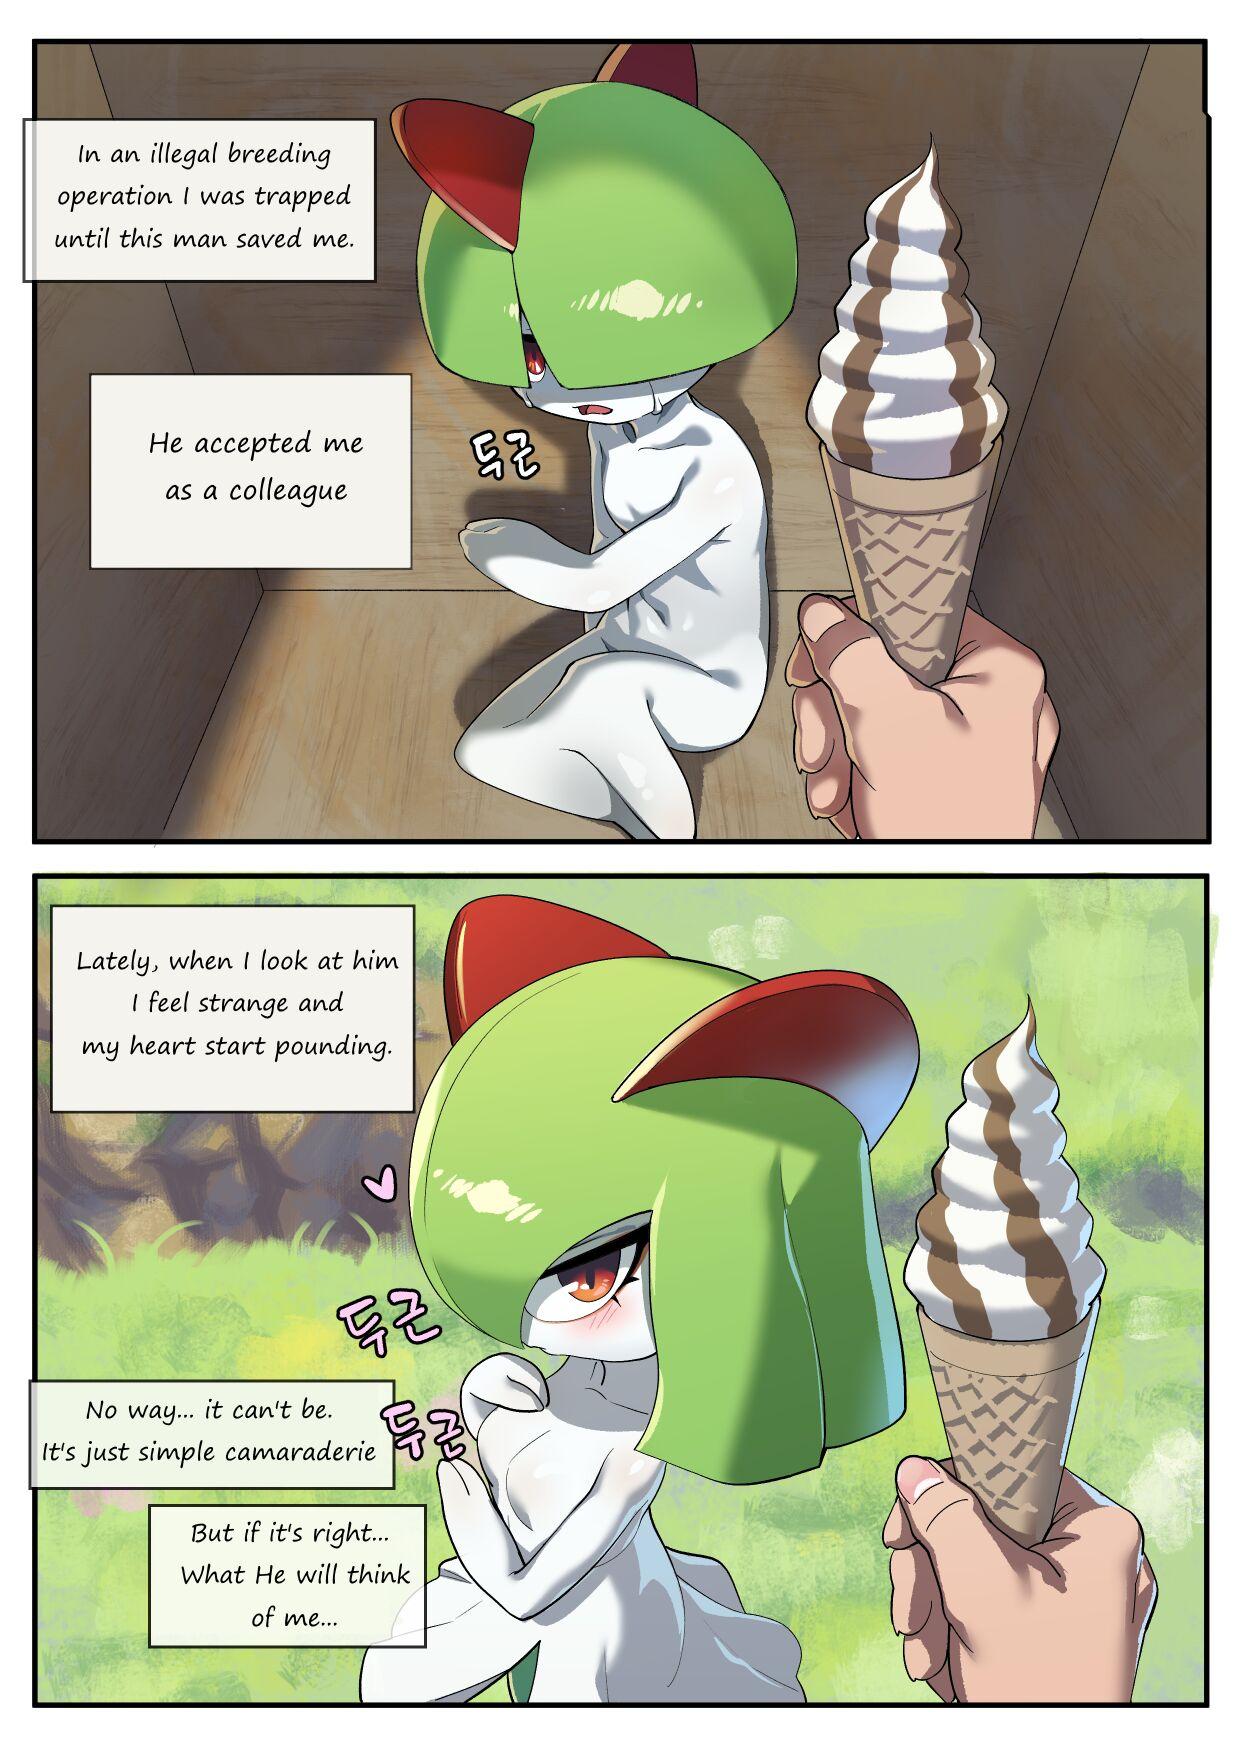 Best Blowjobs Ever The Gardevior that loved her trainer too much - Pokemon | pocket monsters Cumshot - Page 2